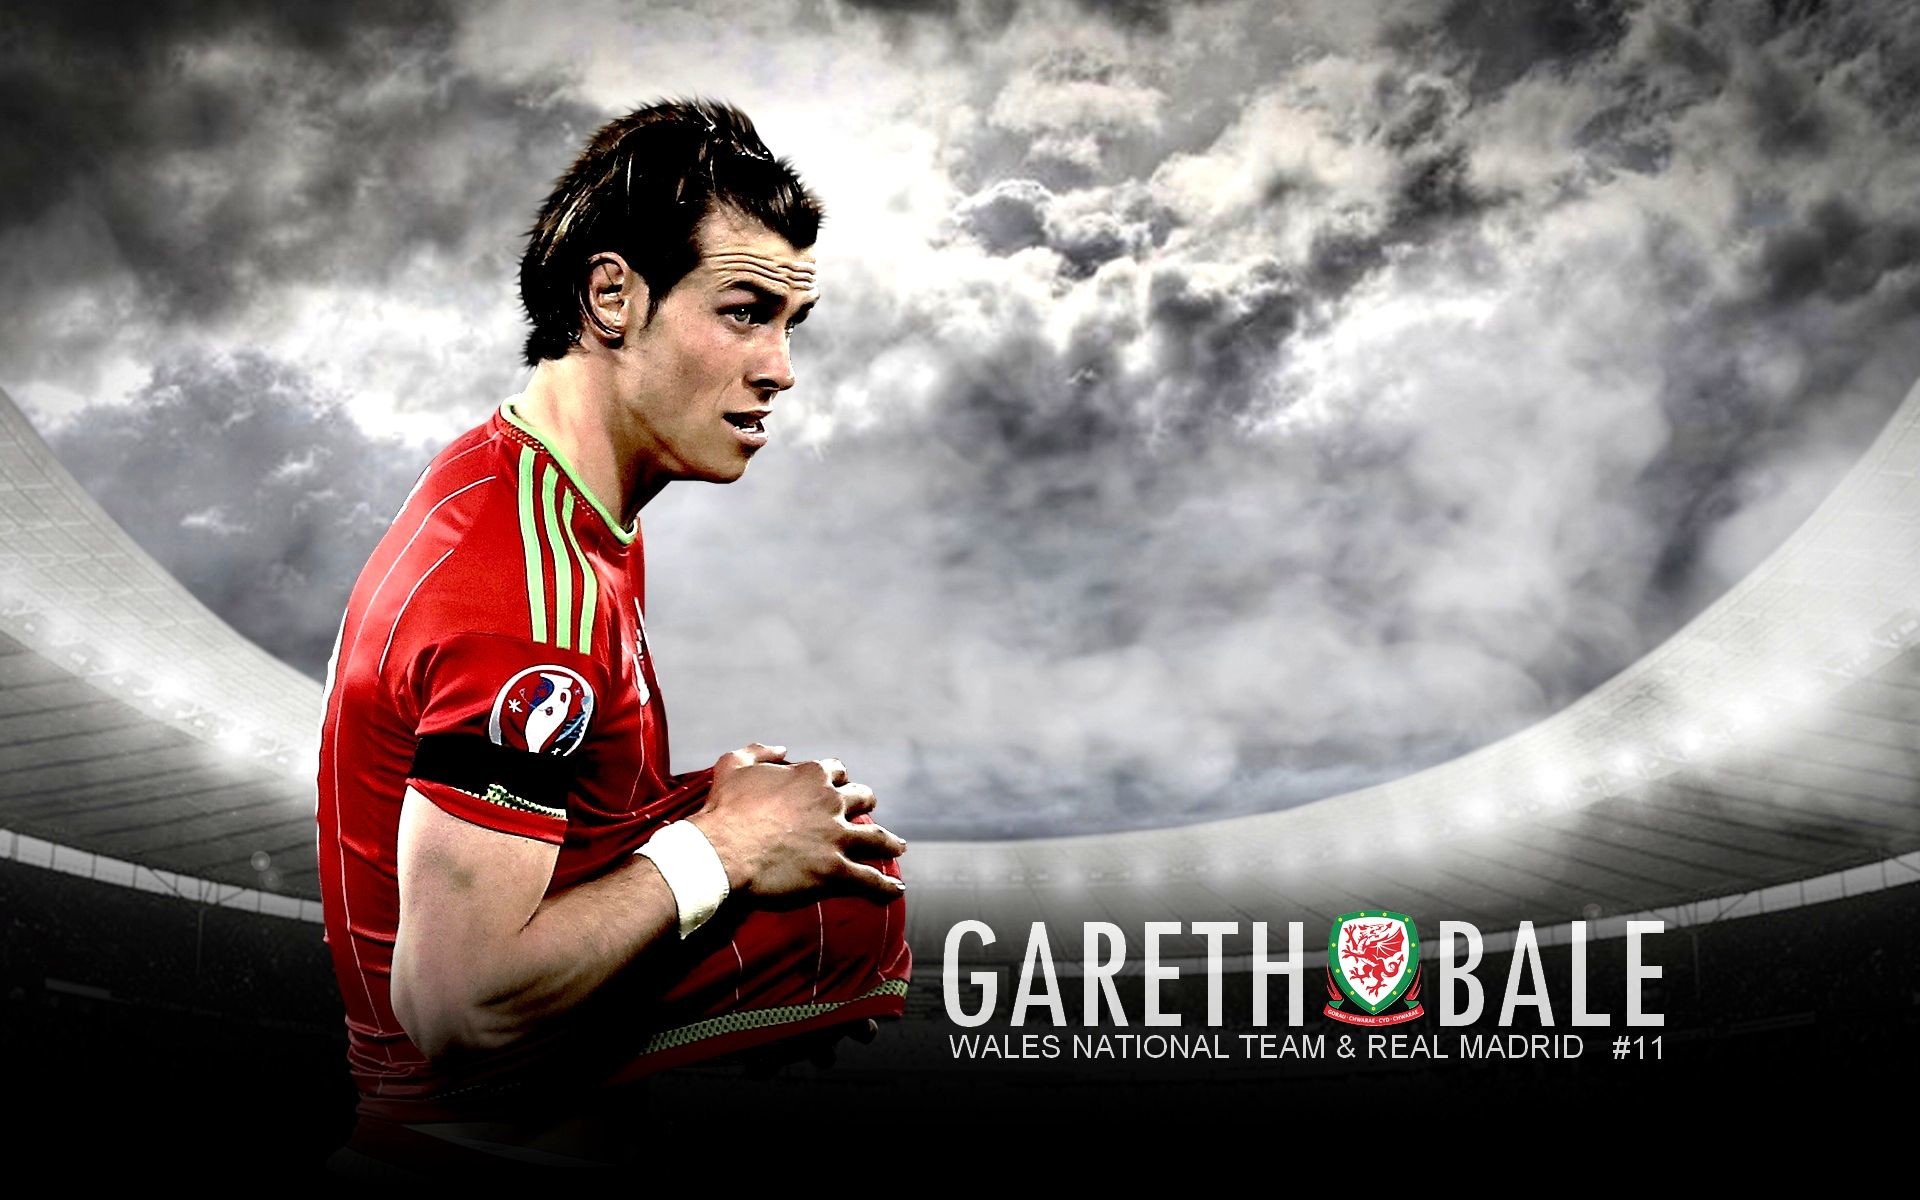 1920x1200 Gareth Bale HD Images - Free download latest Gareth Bale HD Images for  Computer, Mobile, iPhone, iPad or any Gadget at WallpapersCharlie.com.